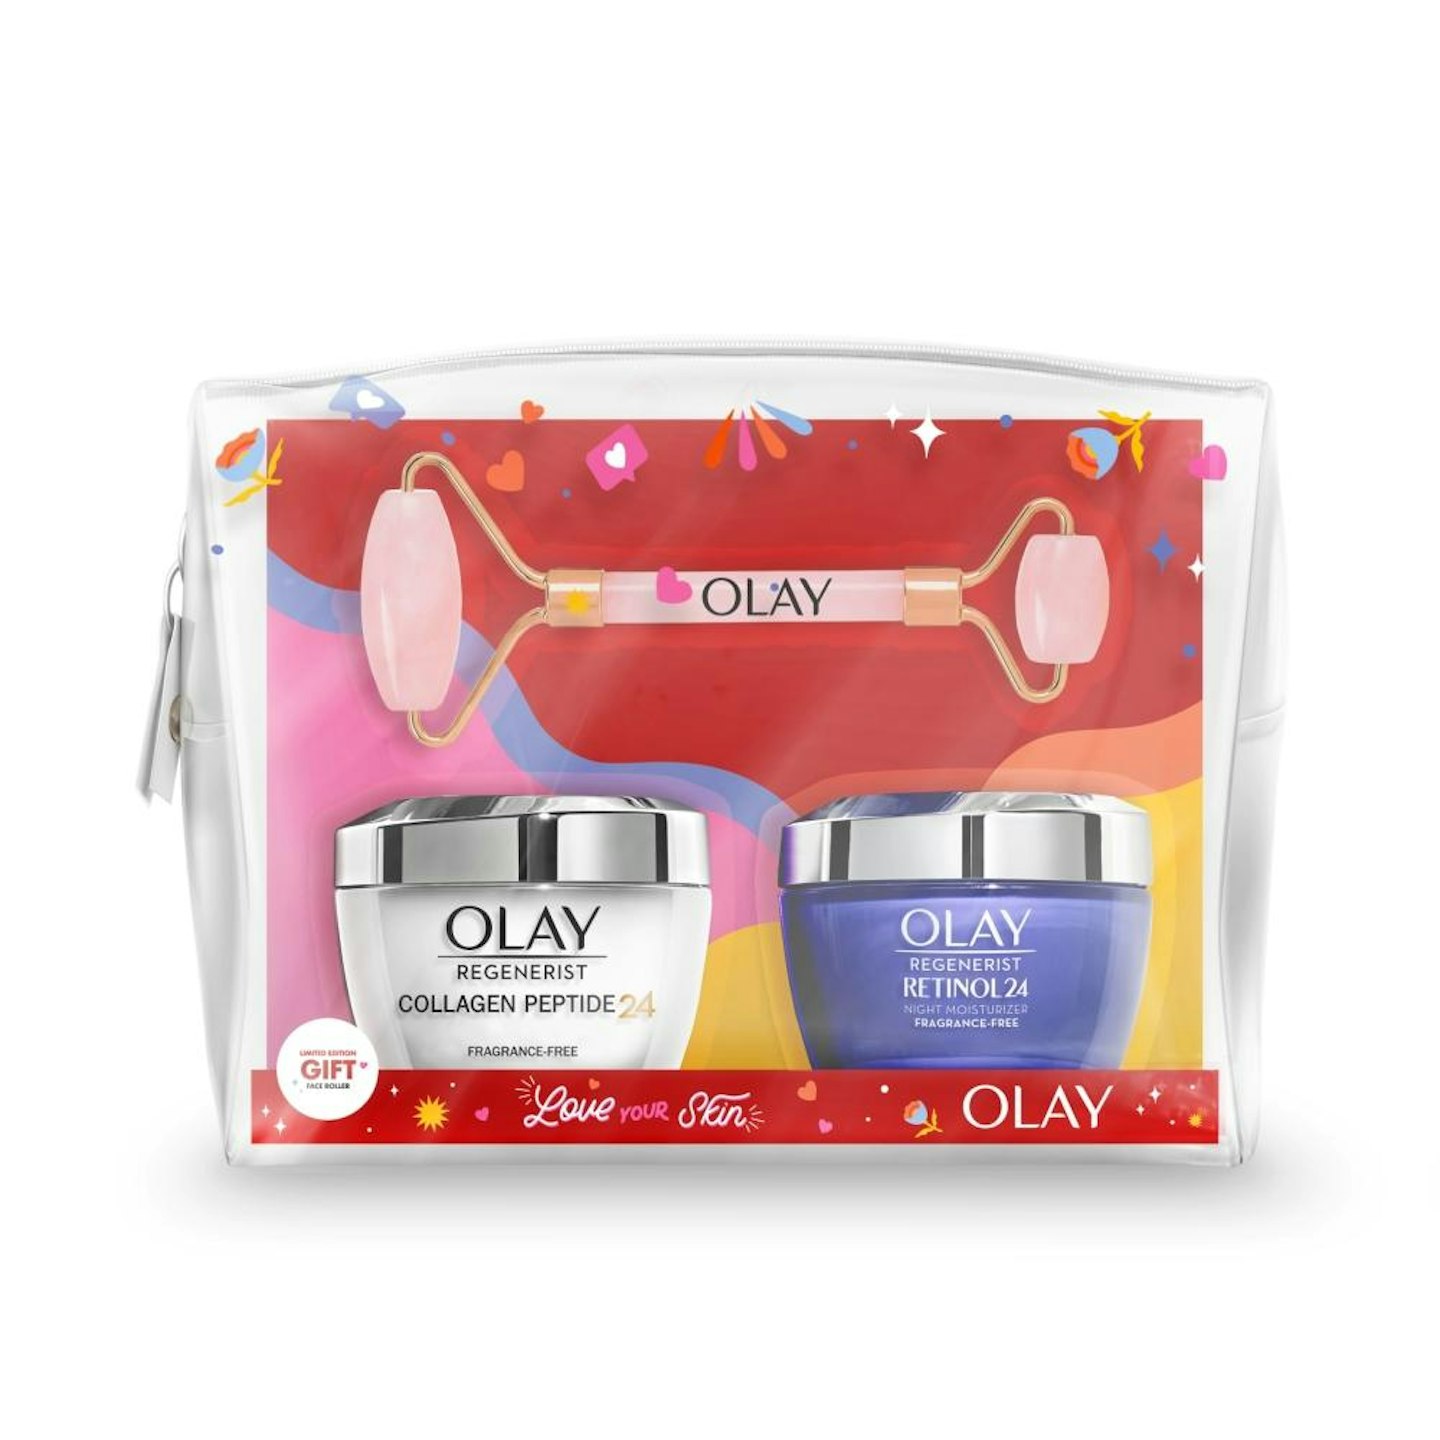 Olay Giftset Collagen Peptide Day, Retinol24 Face Night Cream, Face Roller, £34.99 (Was £70, Saving £35.01)